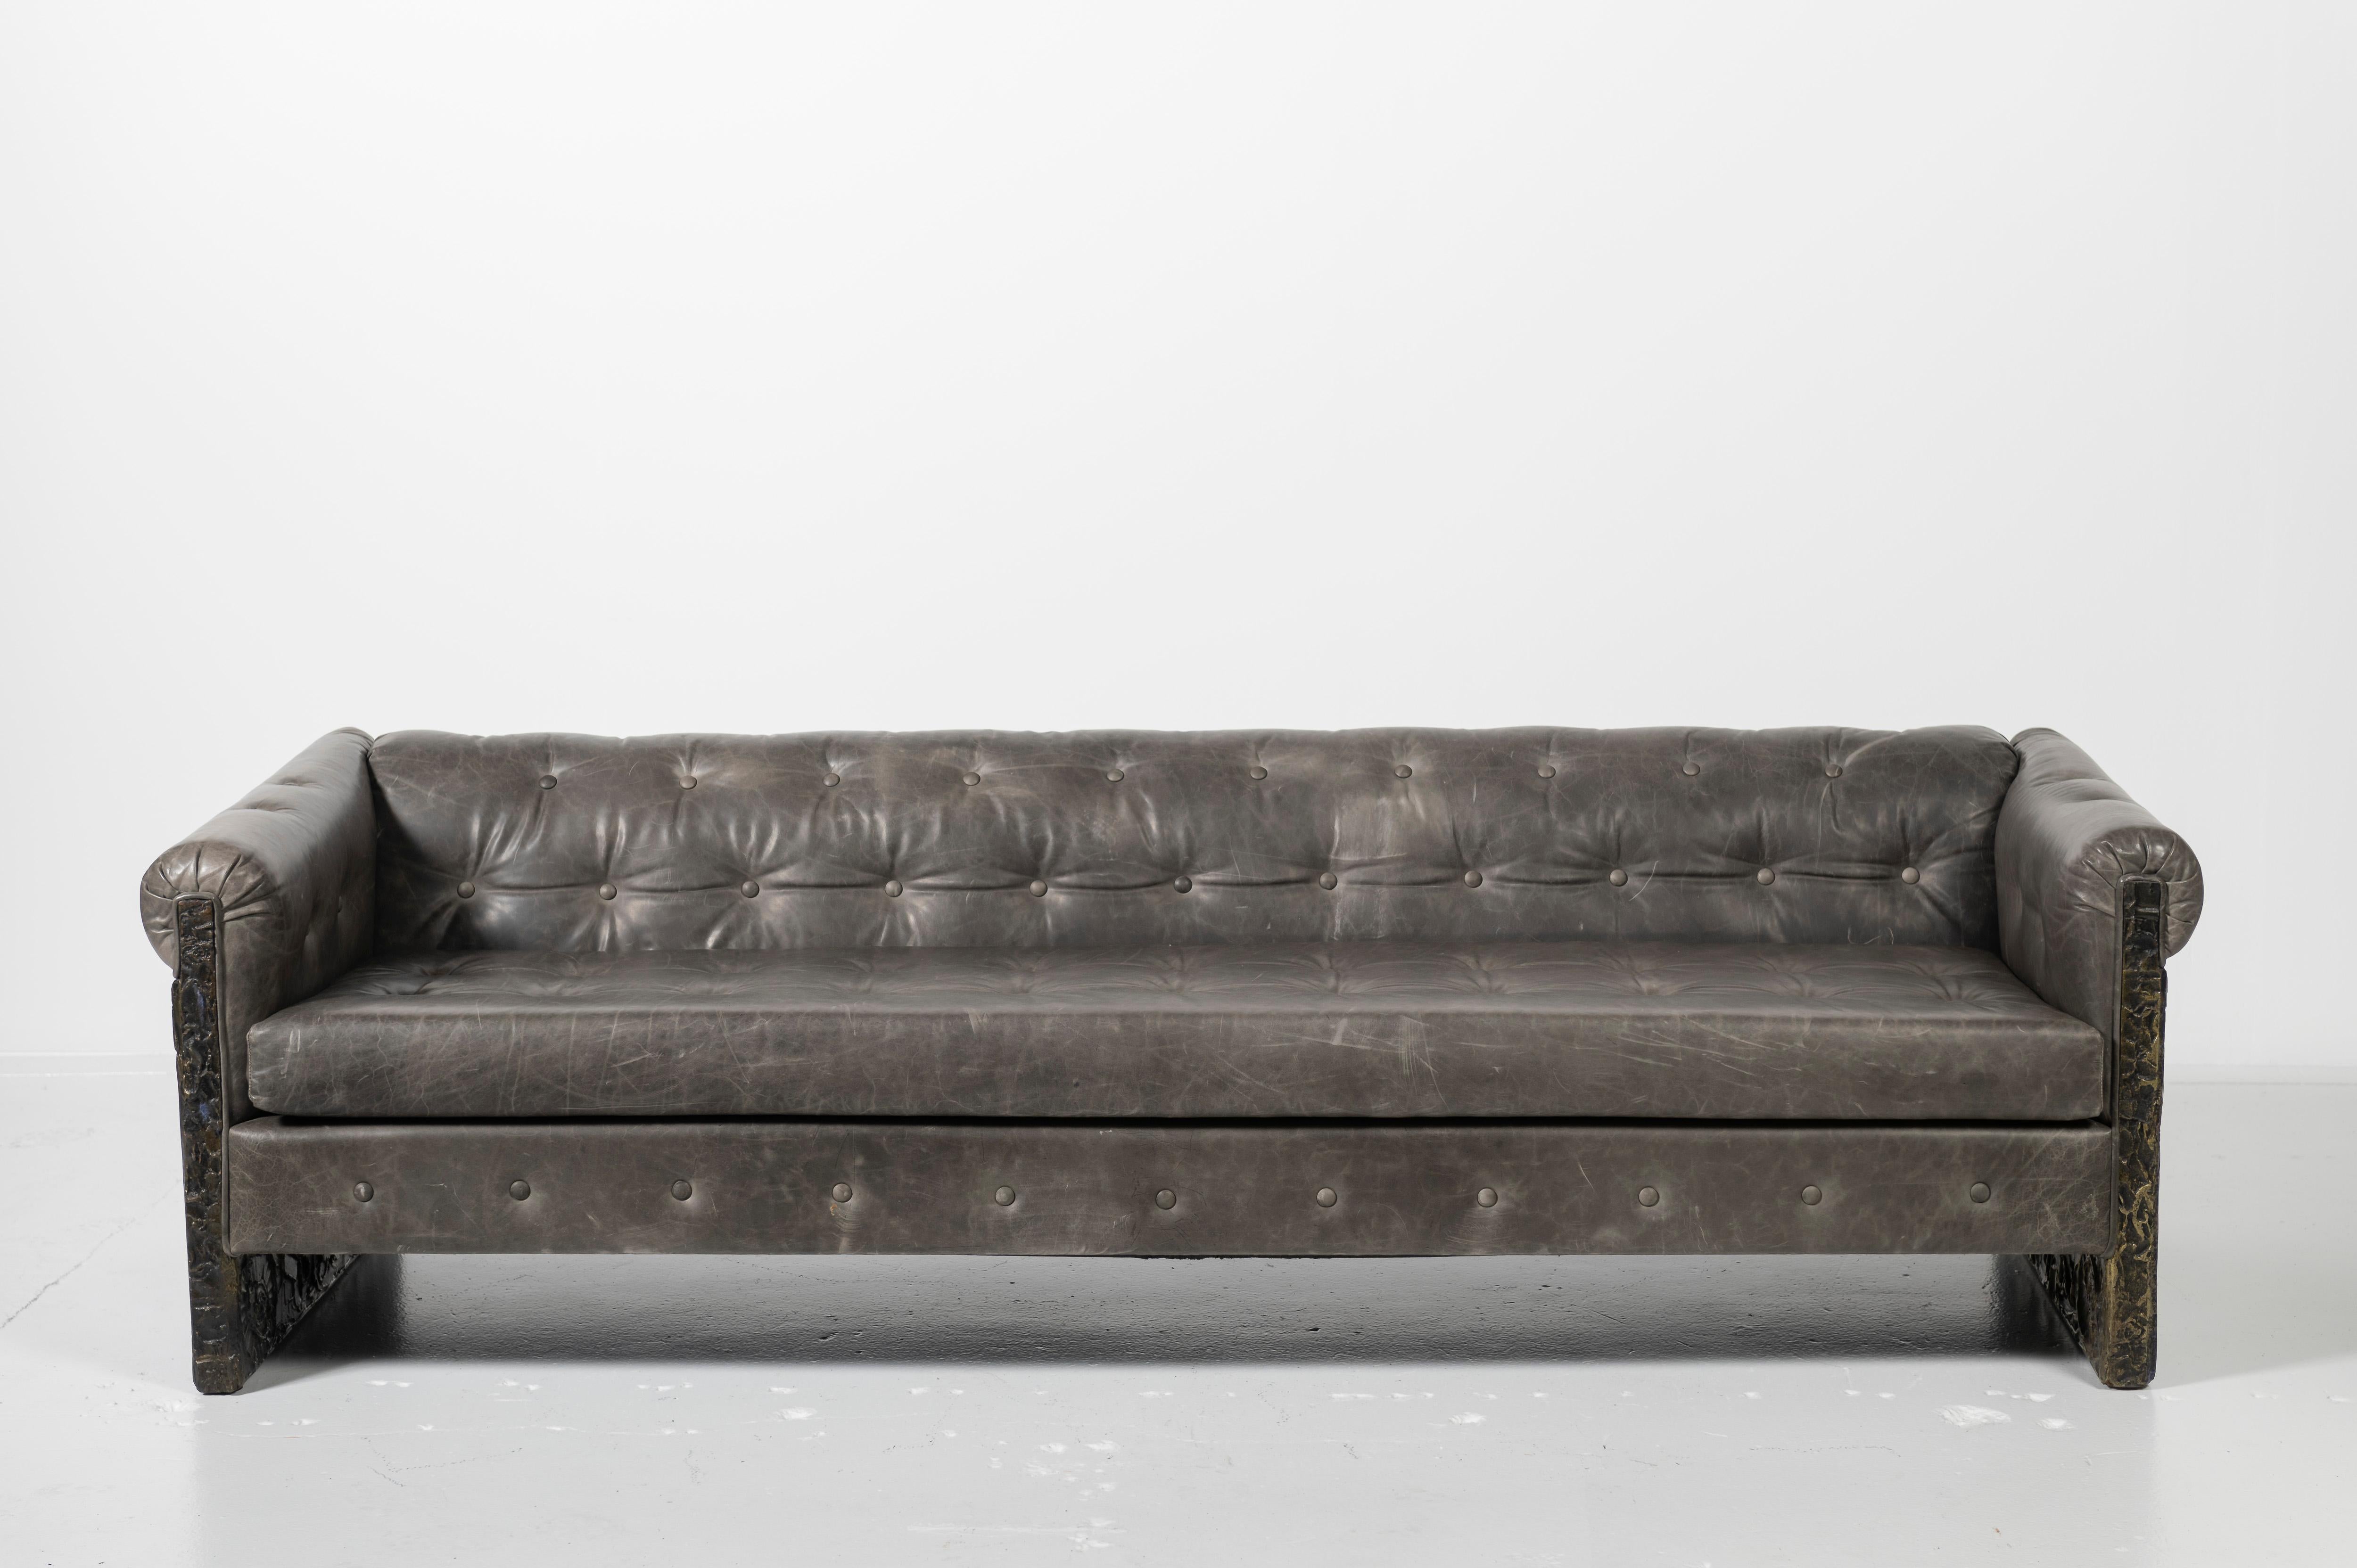 Brutalist Adrian Pearsall Tufted Leather Sofa with Bronzed Resin over Steel Sides